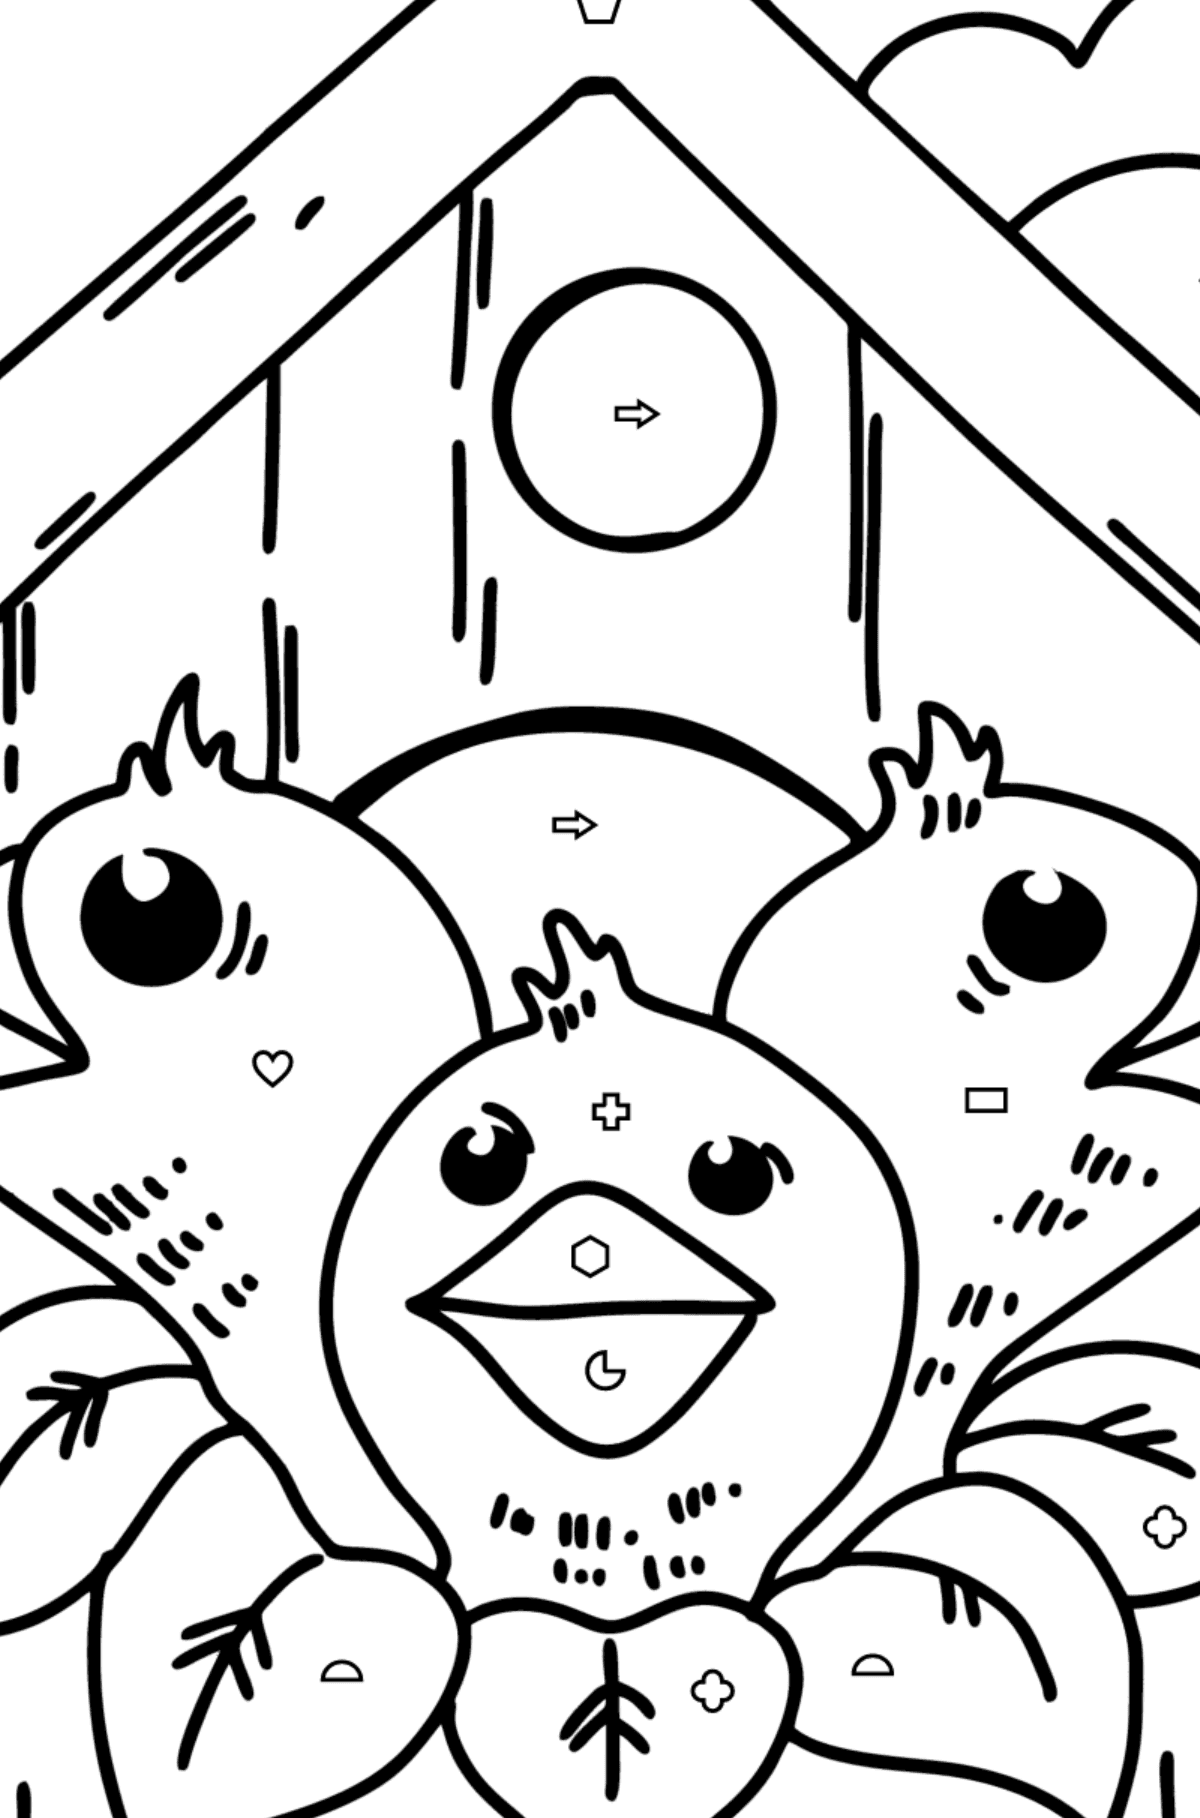 Chicks in a Birdhouse coloring page - Coloring by Geometric Shapes for Kids